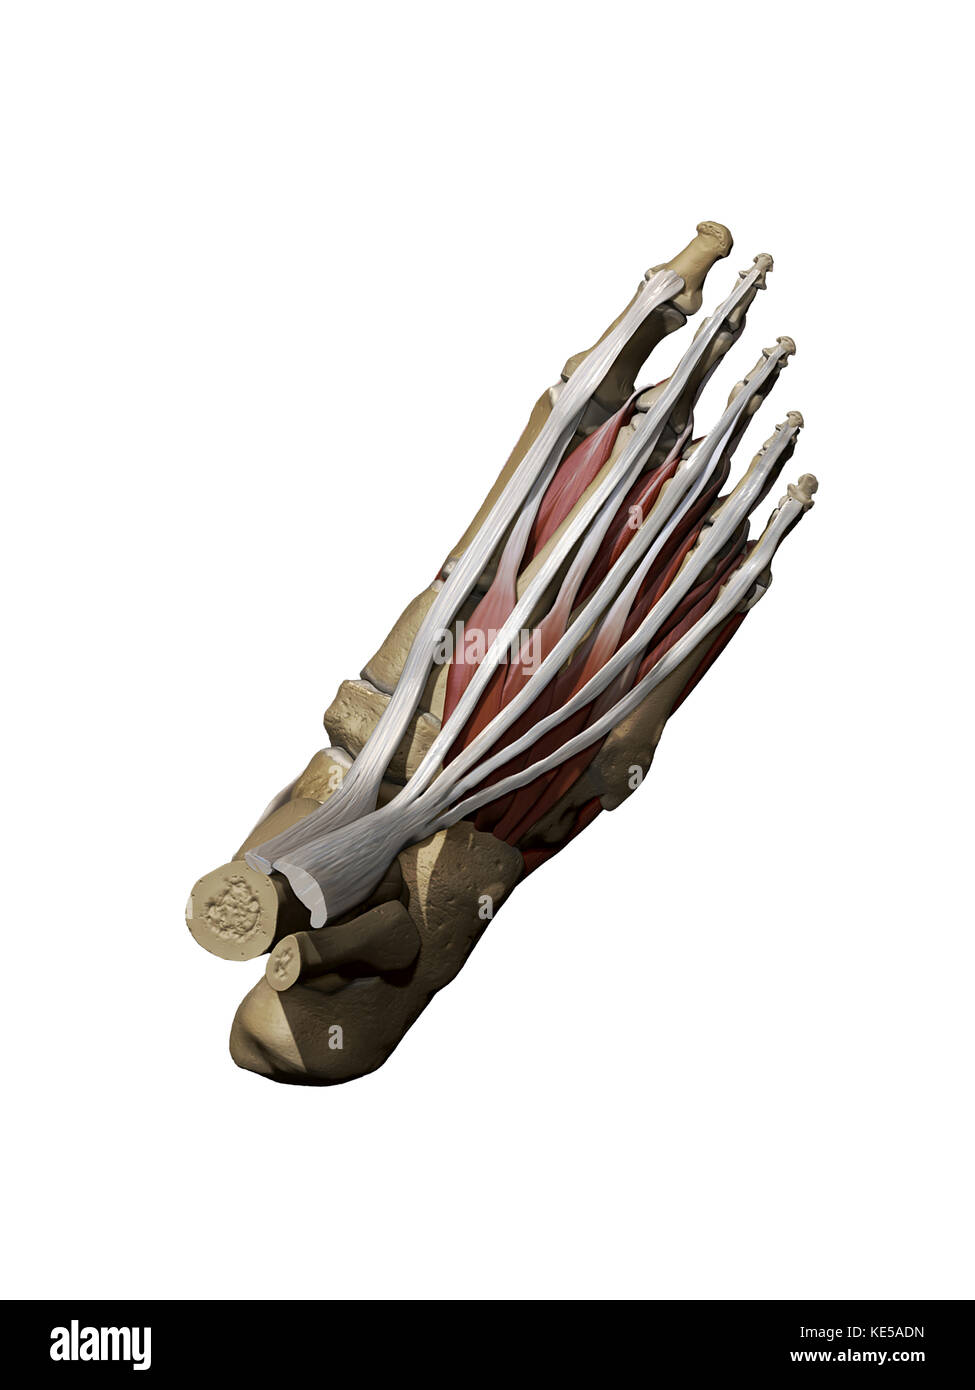 3D model of the foot depicting the dorsal superficial muscles and bone structure. Stock Photo